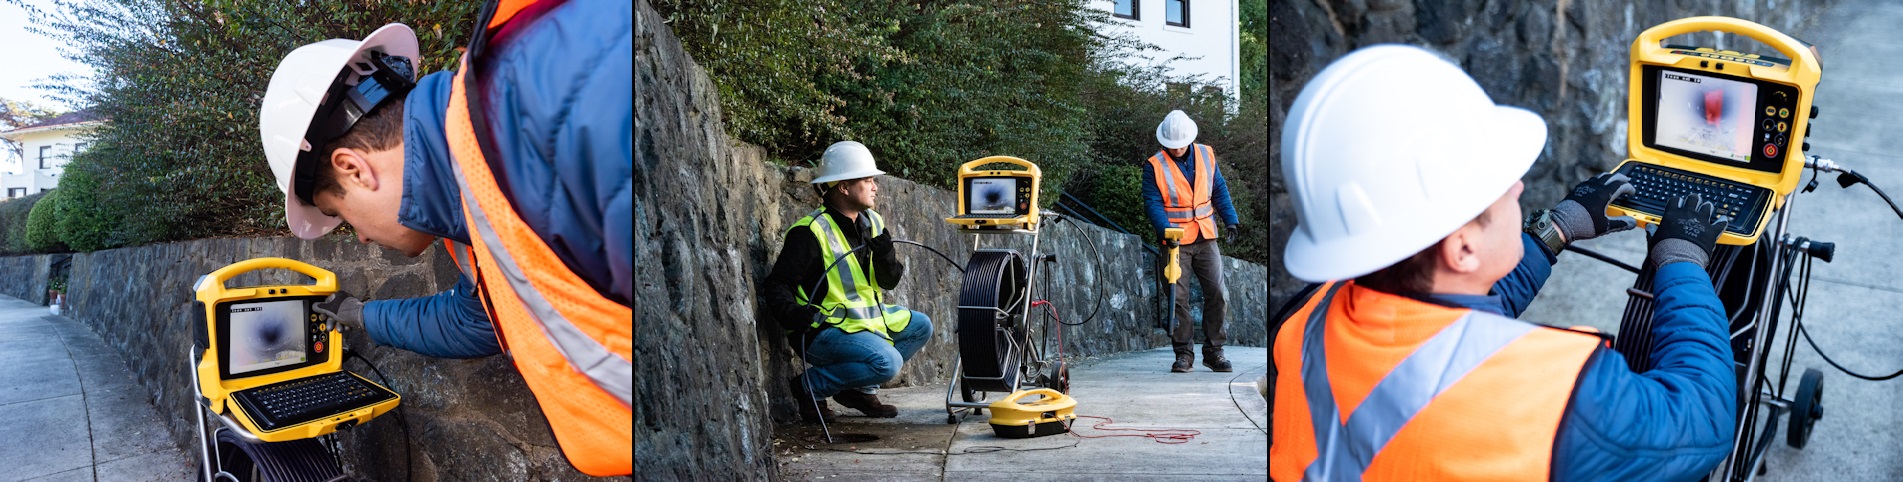 Instrument Technology Corporation - Locating equipment. Water leak detection, pipe and cable locators, video inspection systems, sheath fault locators, gas detectors, ground penetrating radar and more